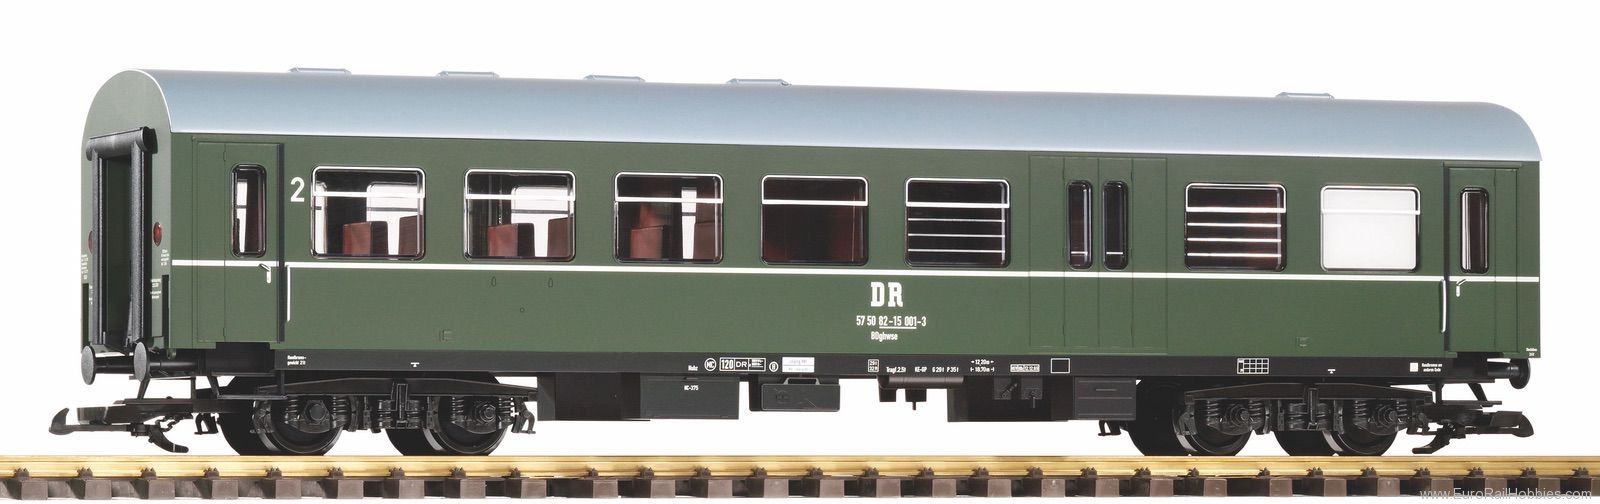 Piko 37656 G Reko-Wagen 2. Class DR III with Baggage Are